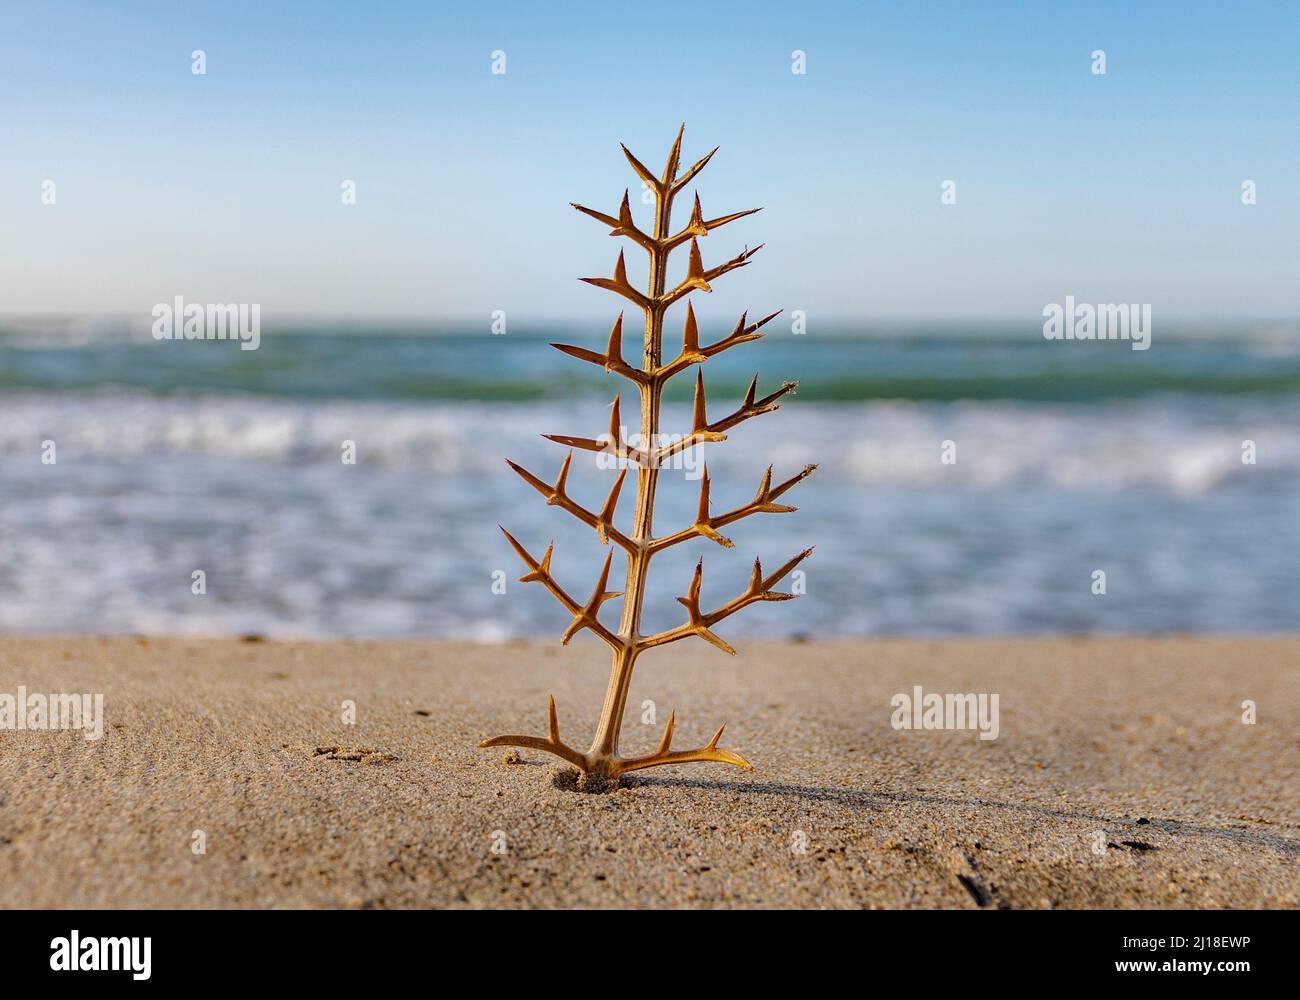 Thorny shrub in the foreground on the beach with the sea in the background Stock Photo